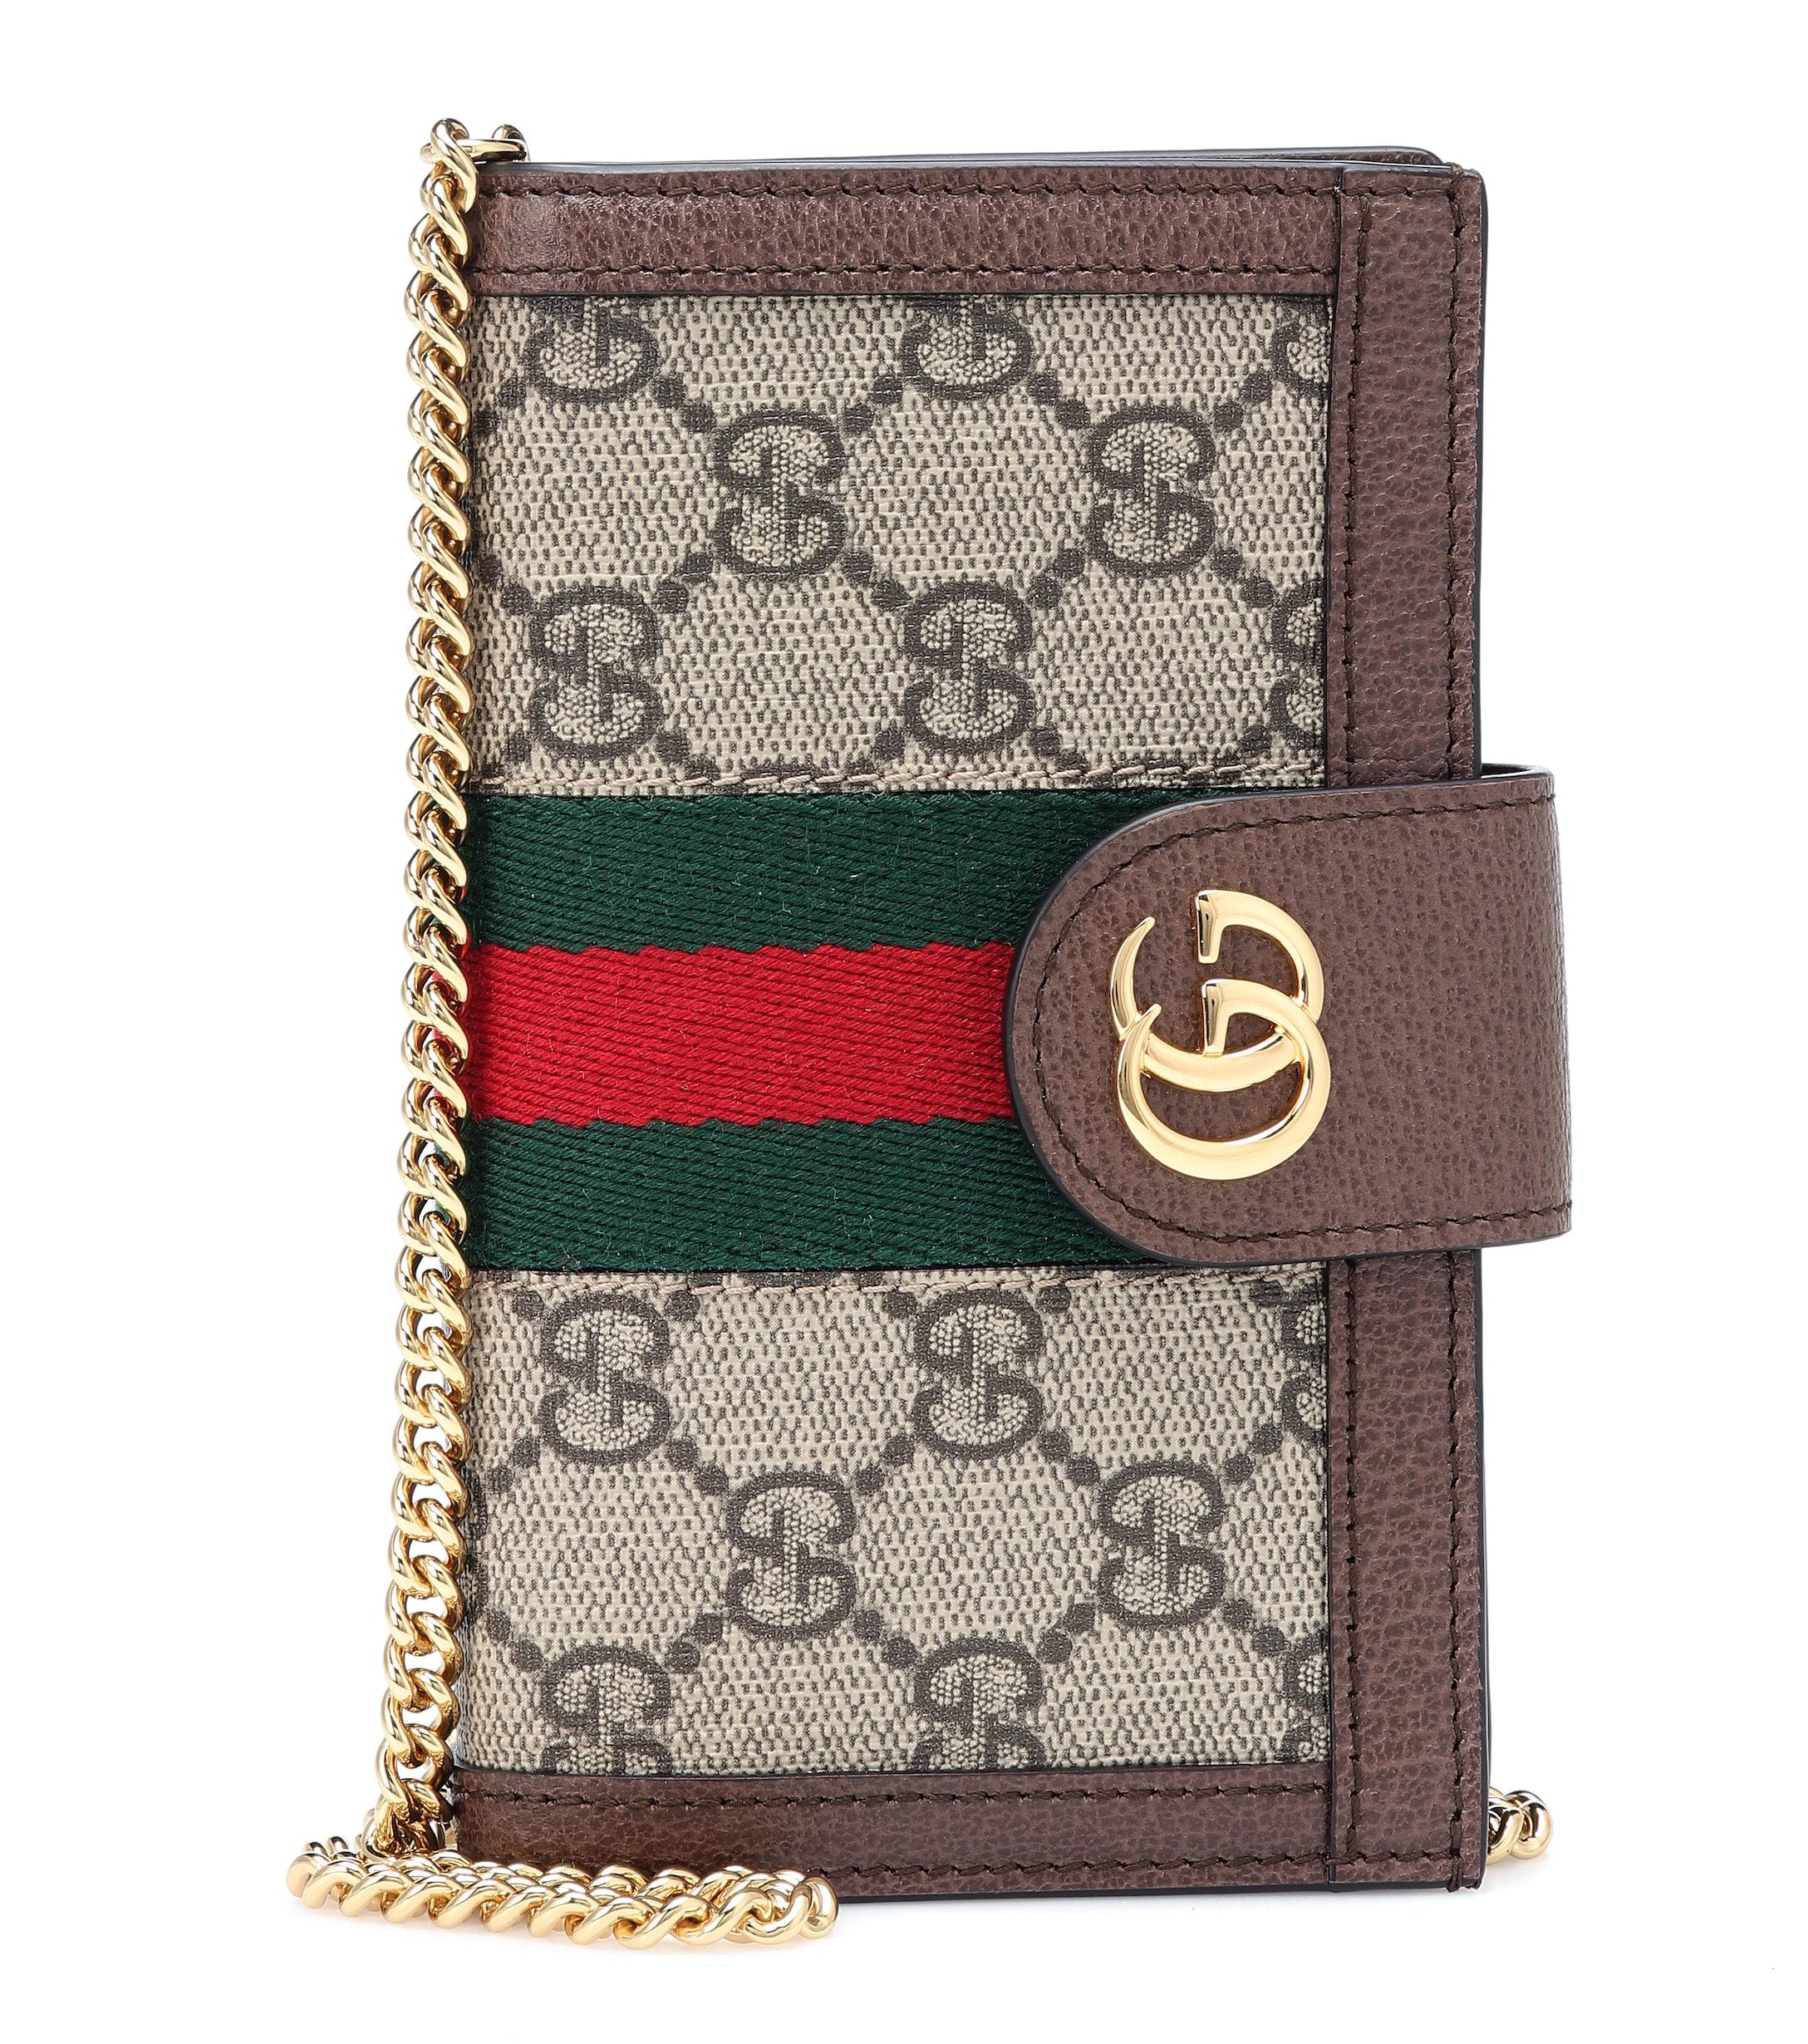 Gucci Canvas Ophidia Iphone X/xs Case - Save 1% - Lyst